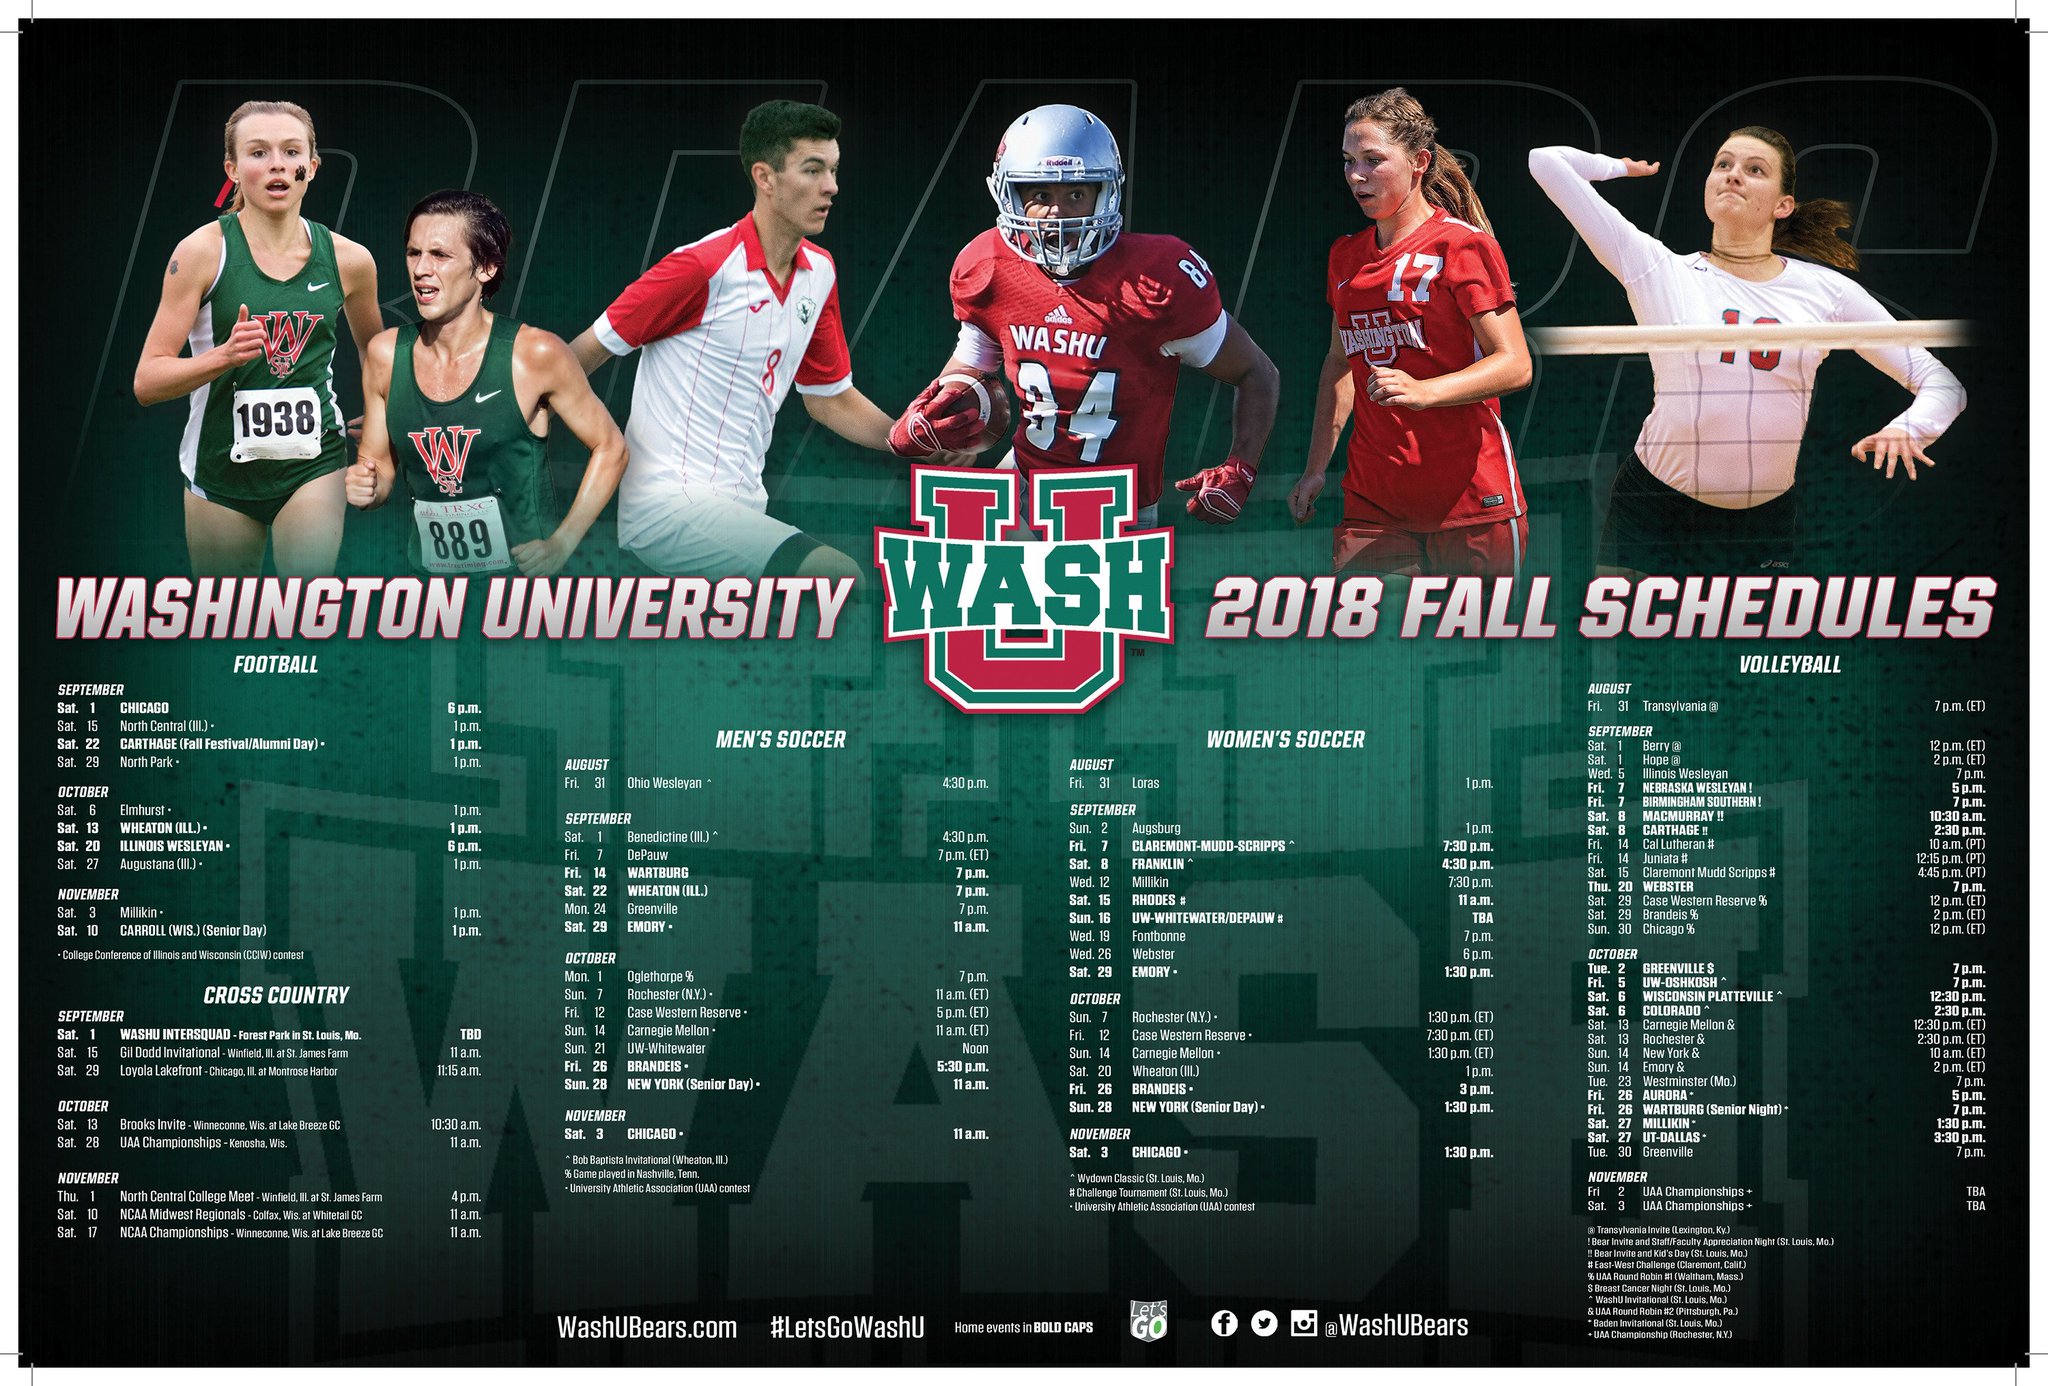 WashU Bears on Twitter "We are less than a month till the start of the